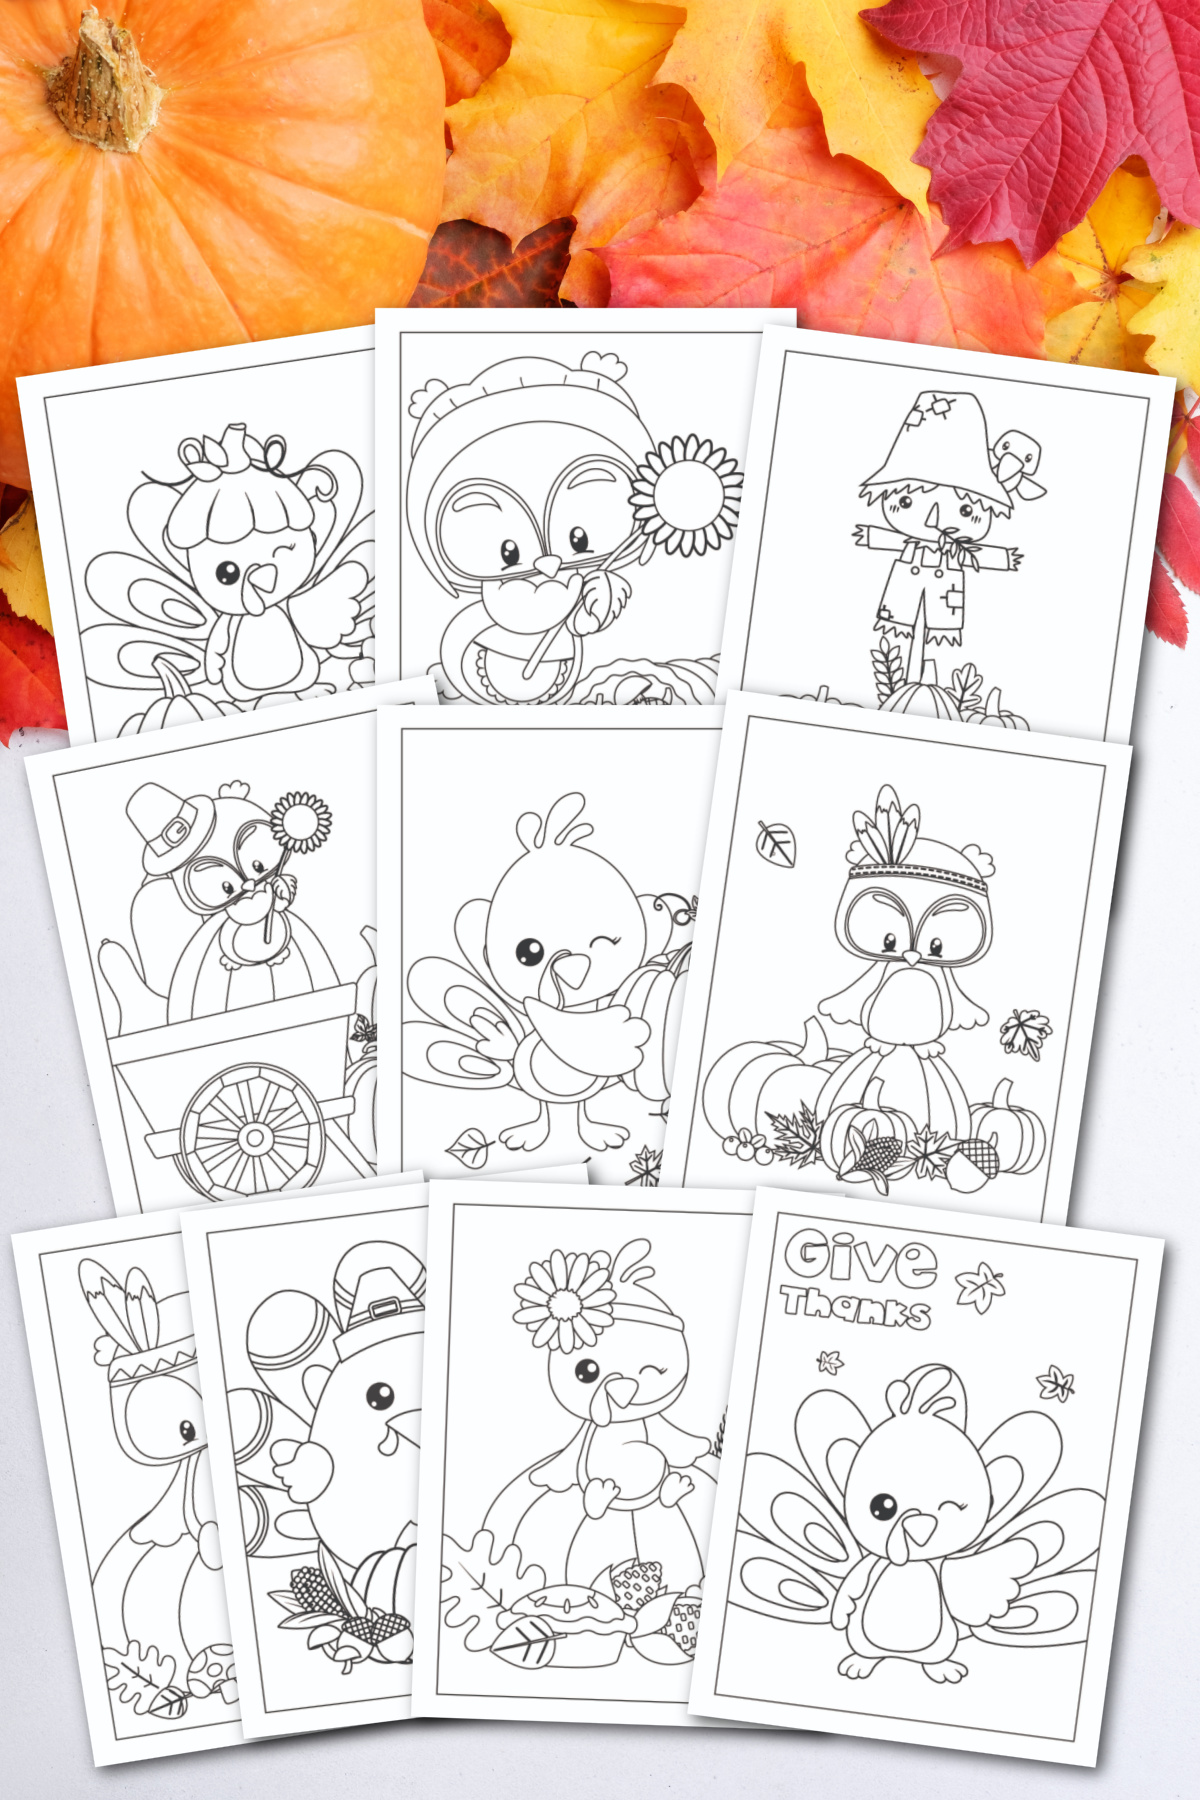 Thanksgiving coloring pages for kids.